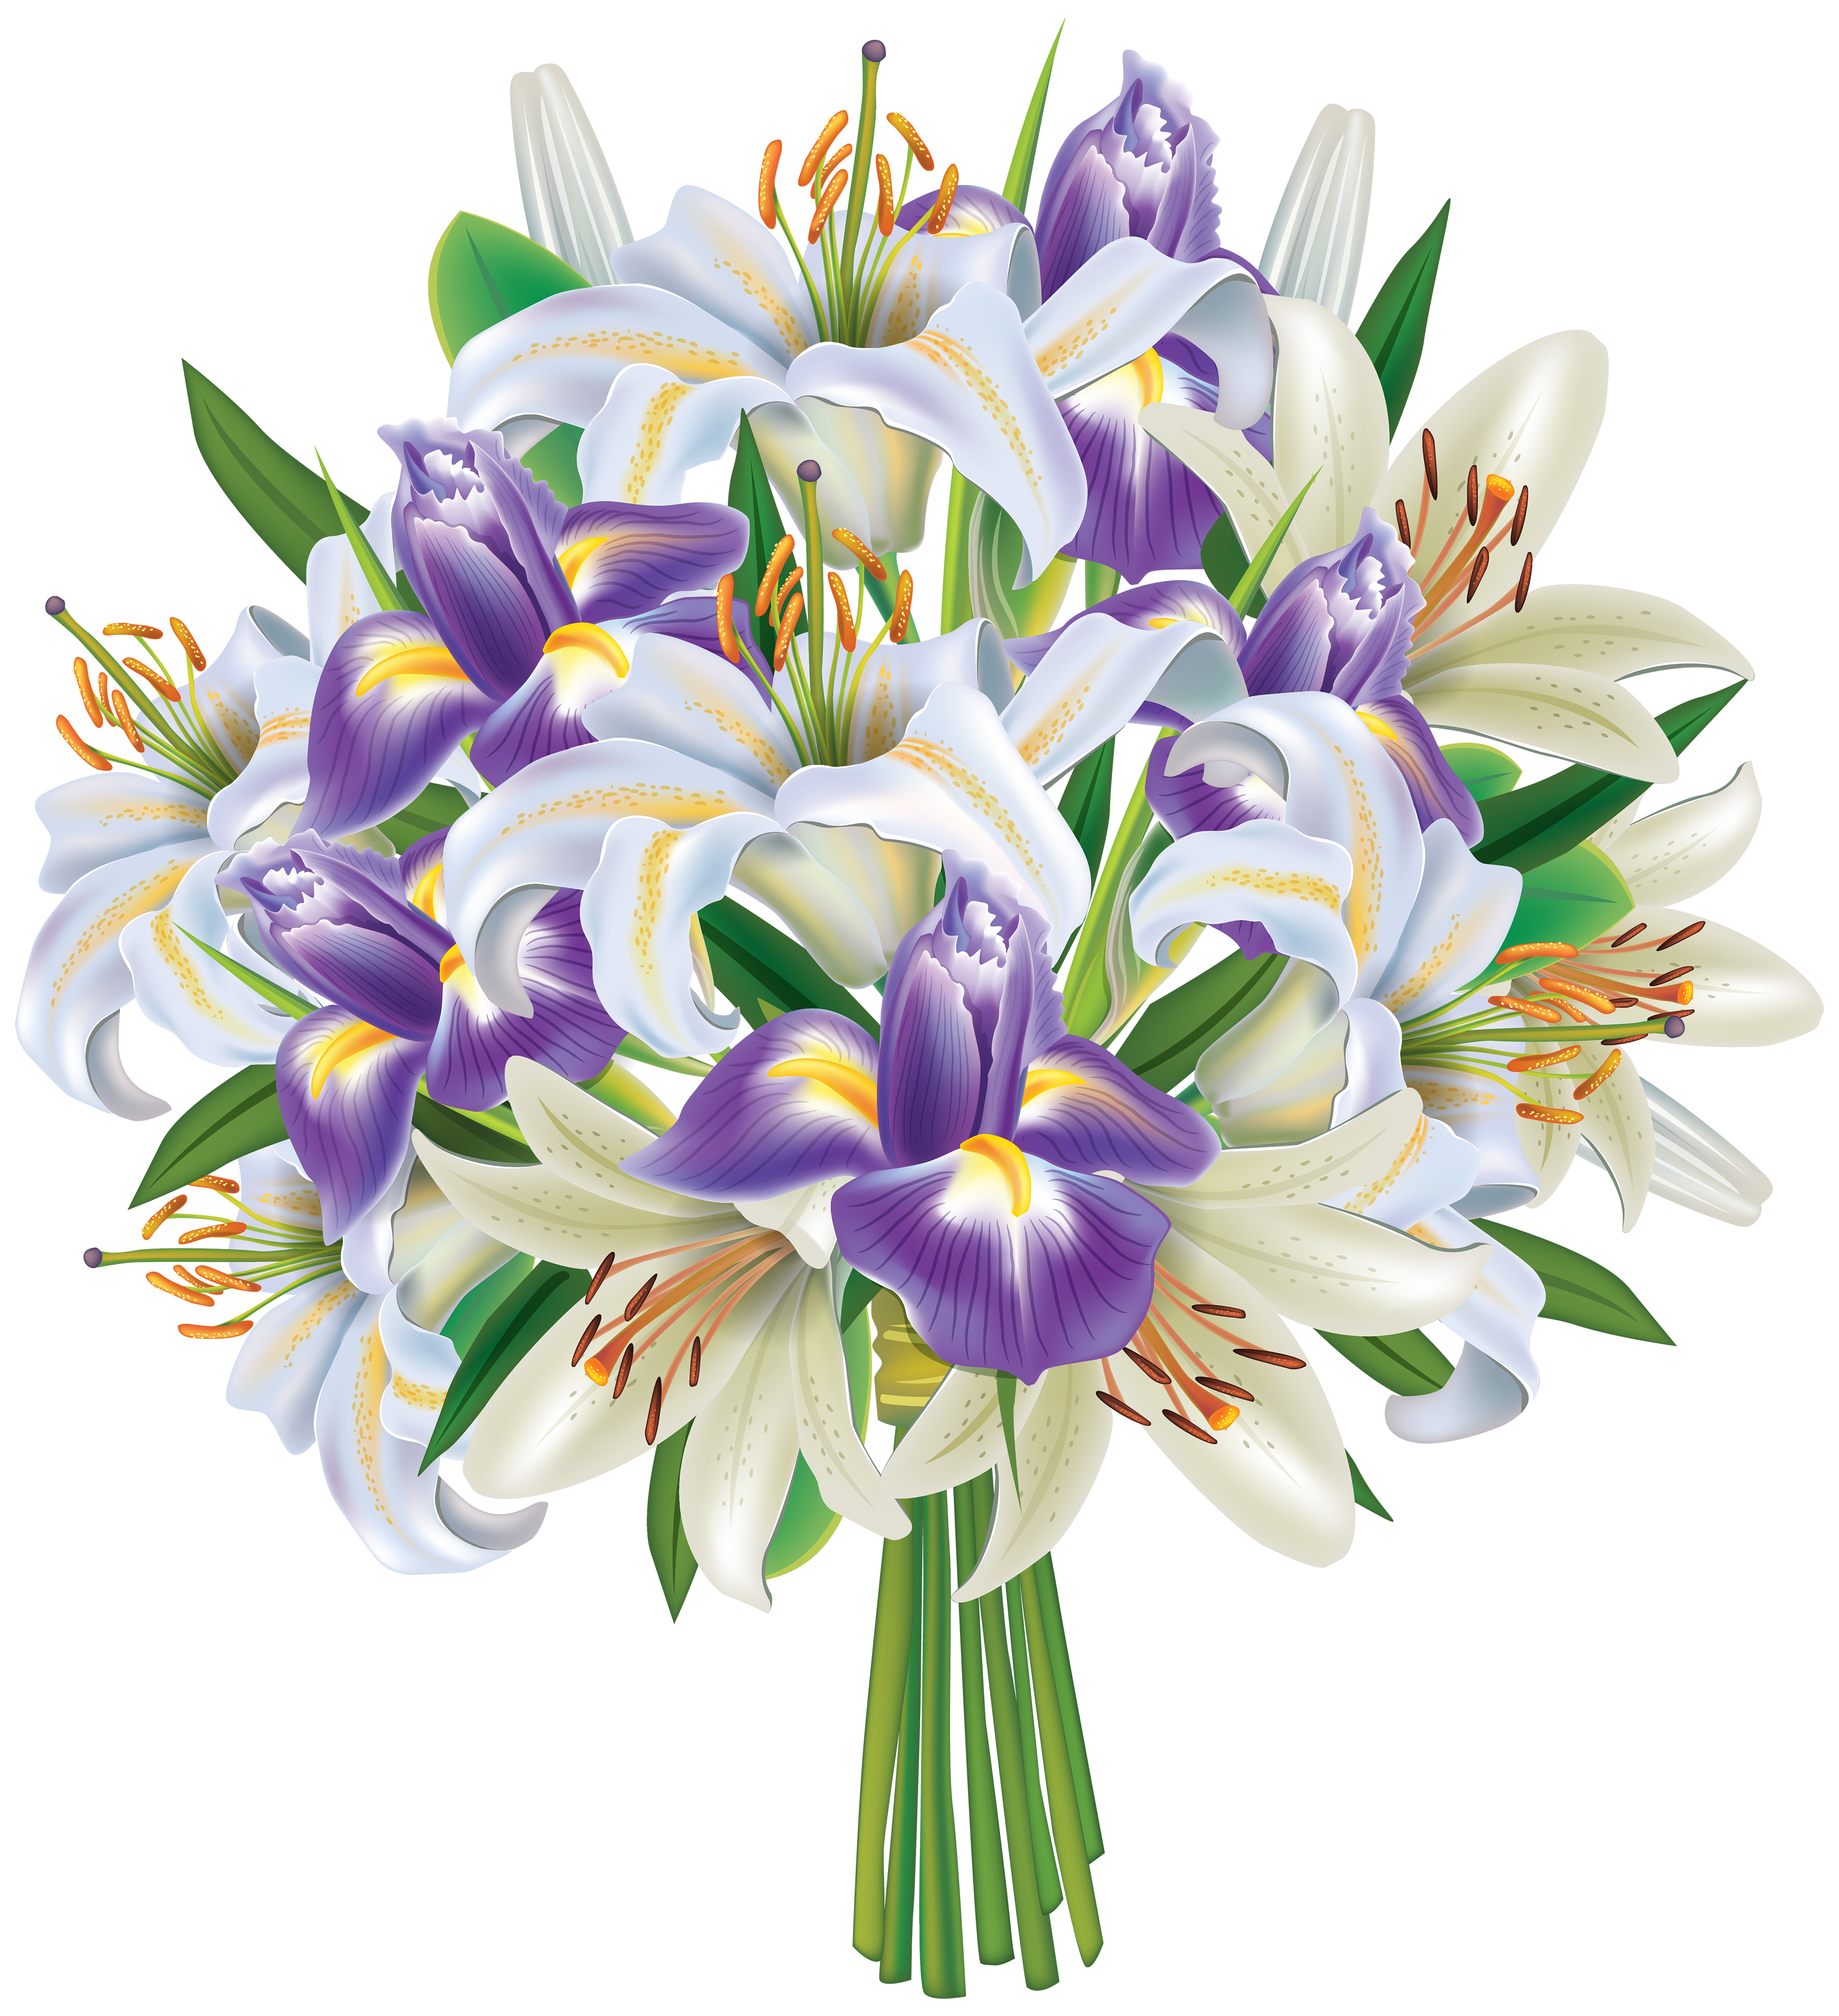 Purple Iris Flowers and Lilies Bouquet PNG Clipart Image 